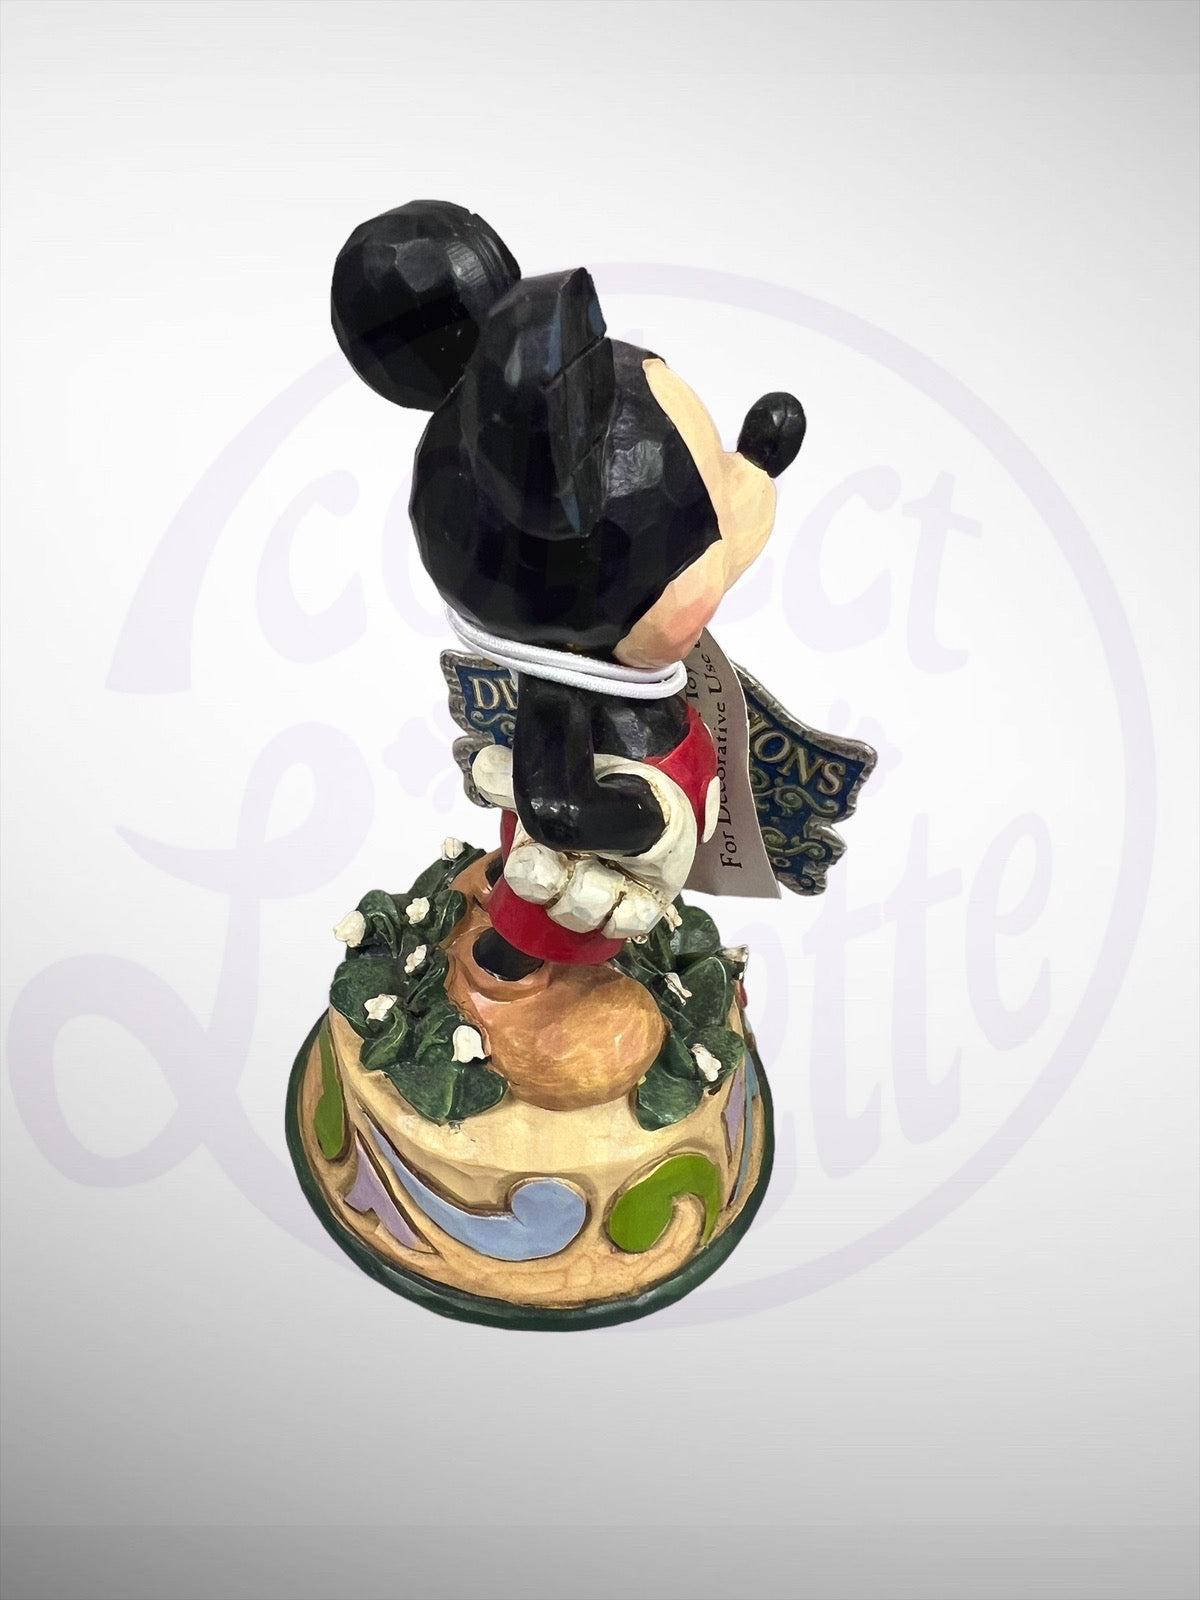 Jim Shore Disney Traditions - May Mickey Mouse Figurine